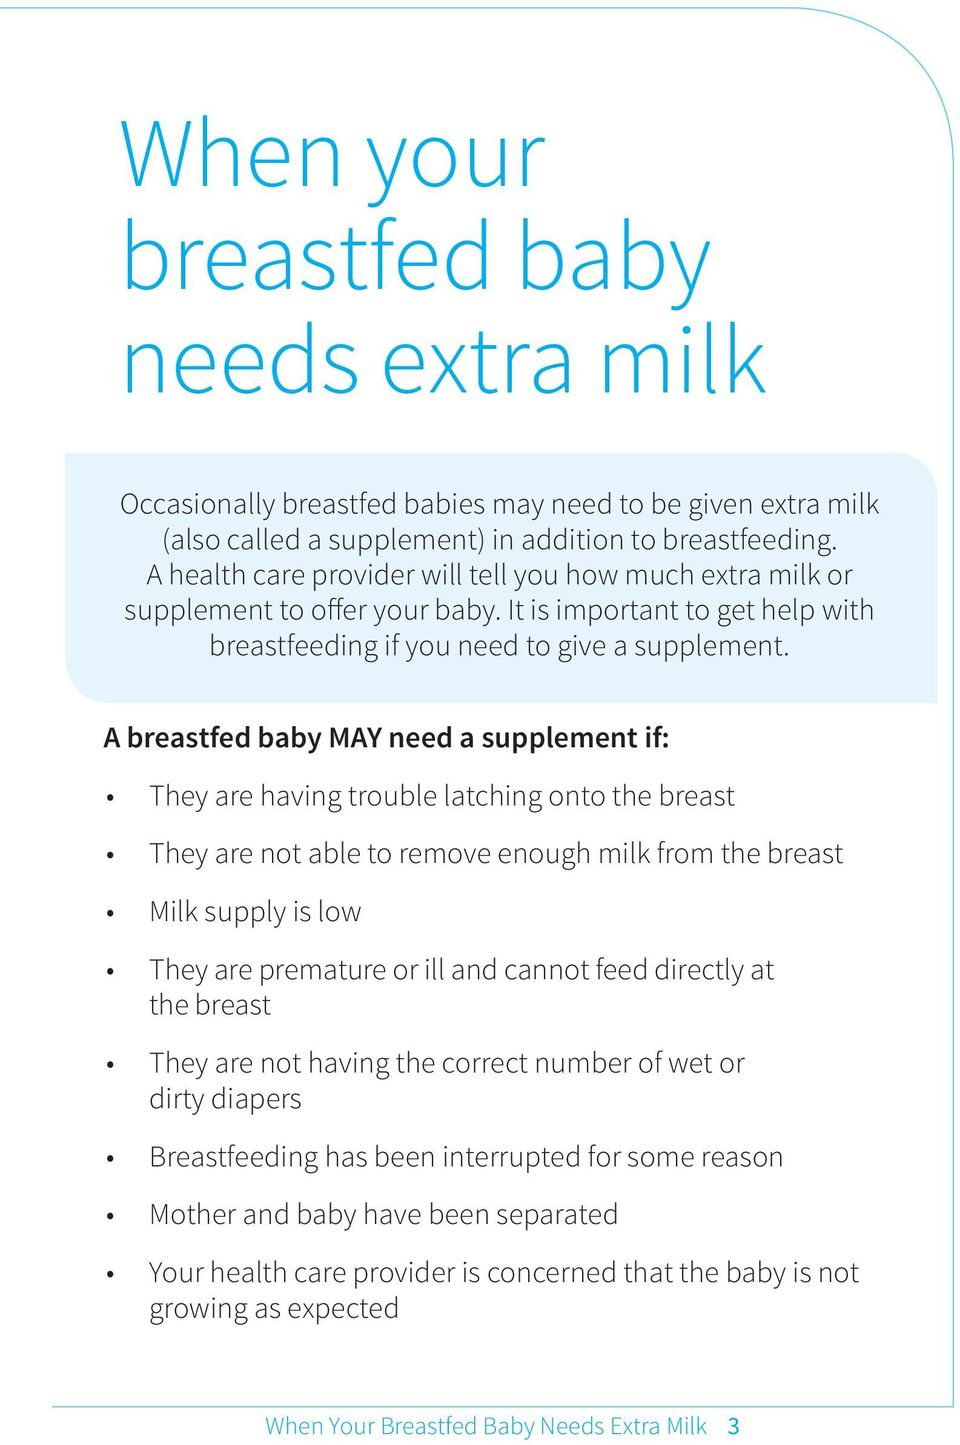 A breastfed baby MAY need a supplement if: They are having trouble latching onto the breast They are not able to remove enough milk from the breast Milk supply is low They are premature or ill and